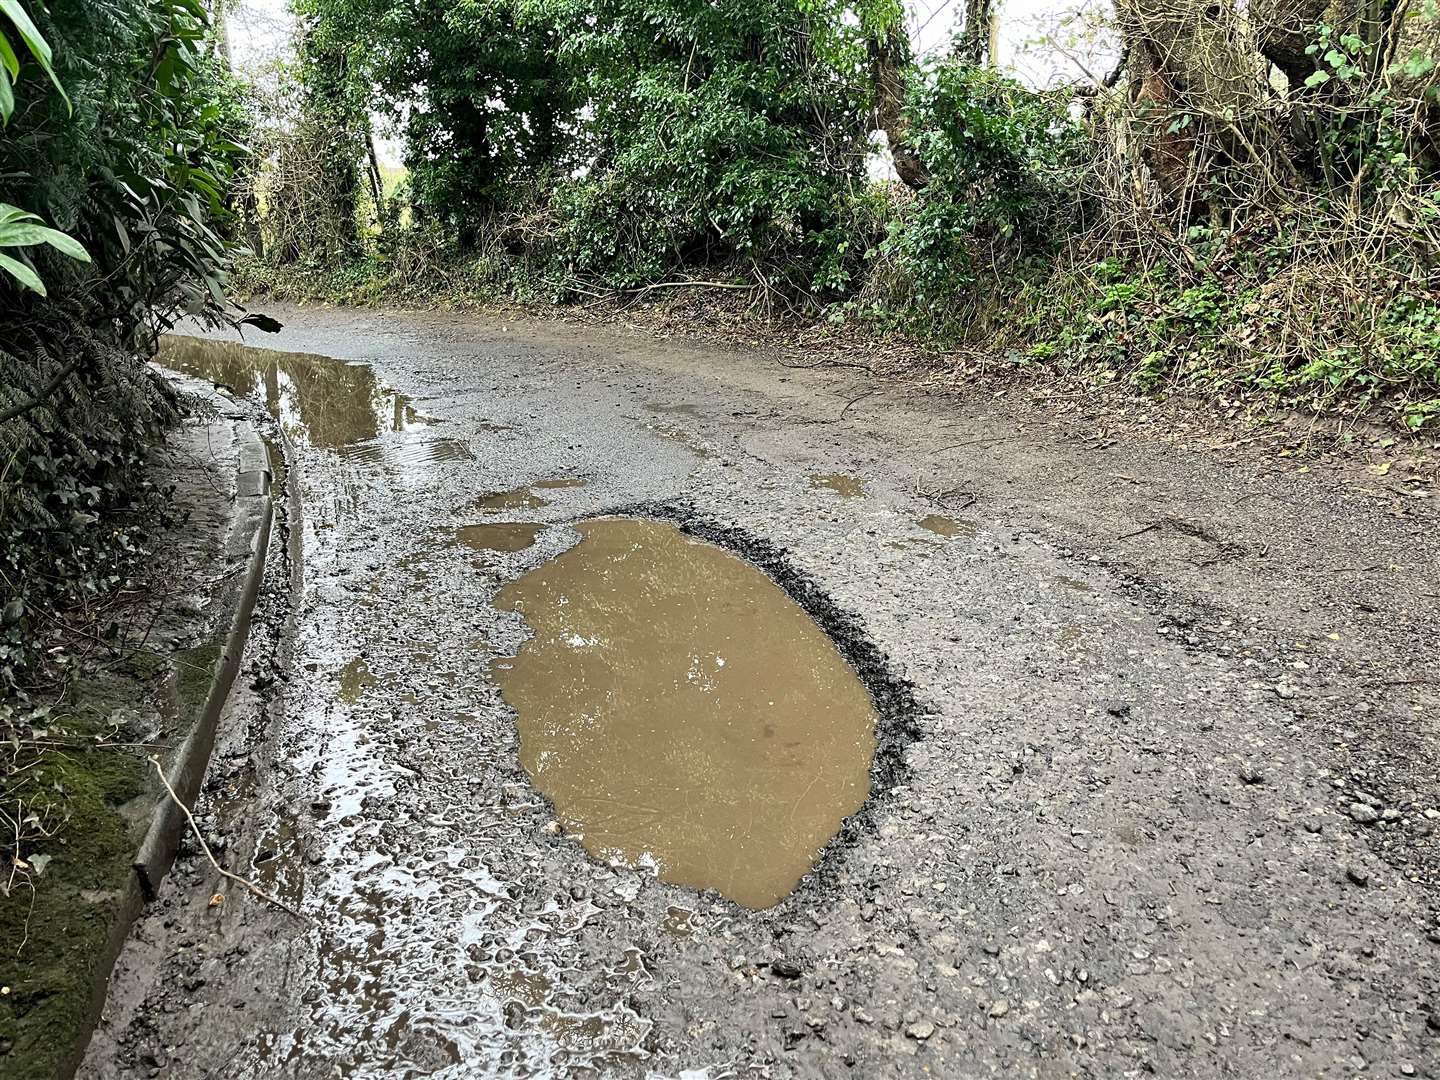 One of the potholes in the village